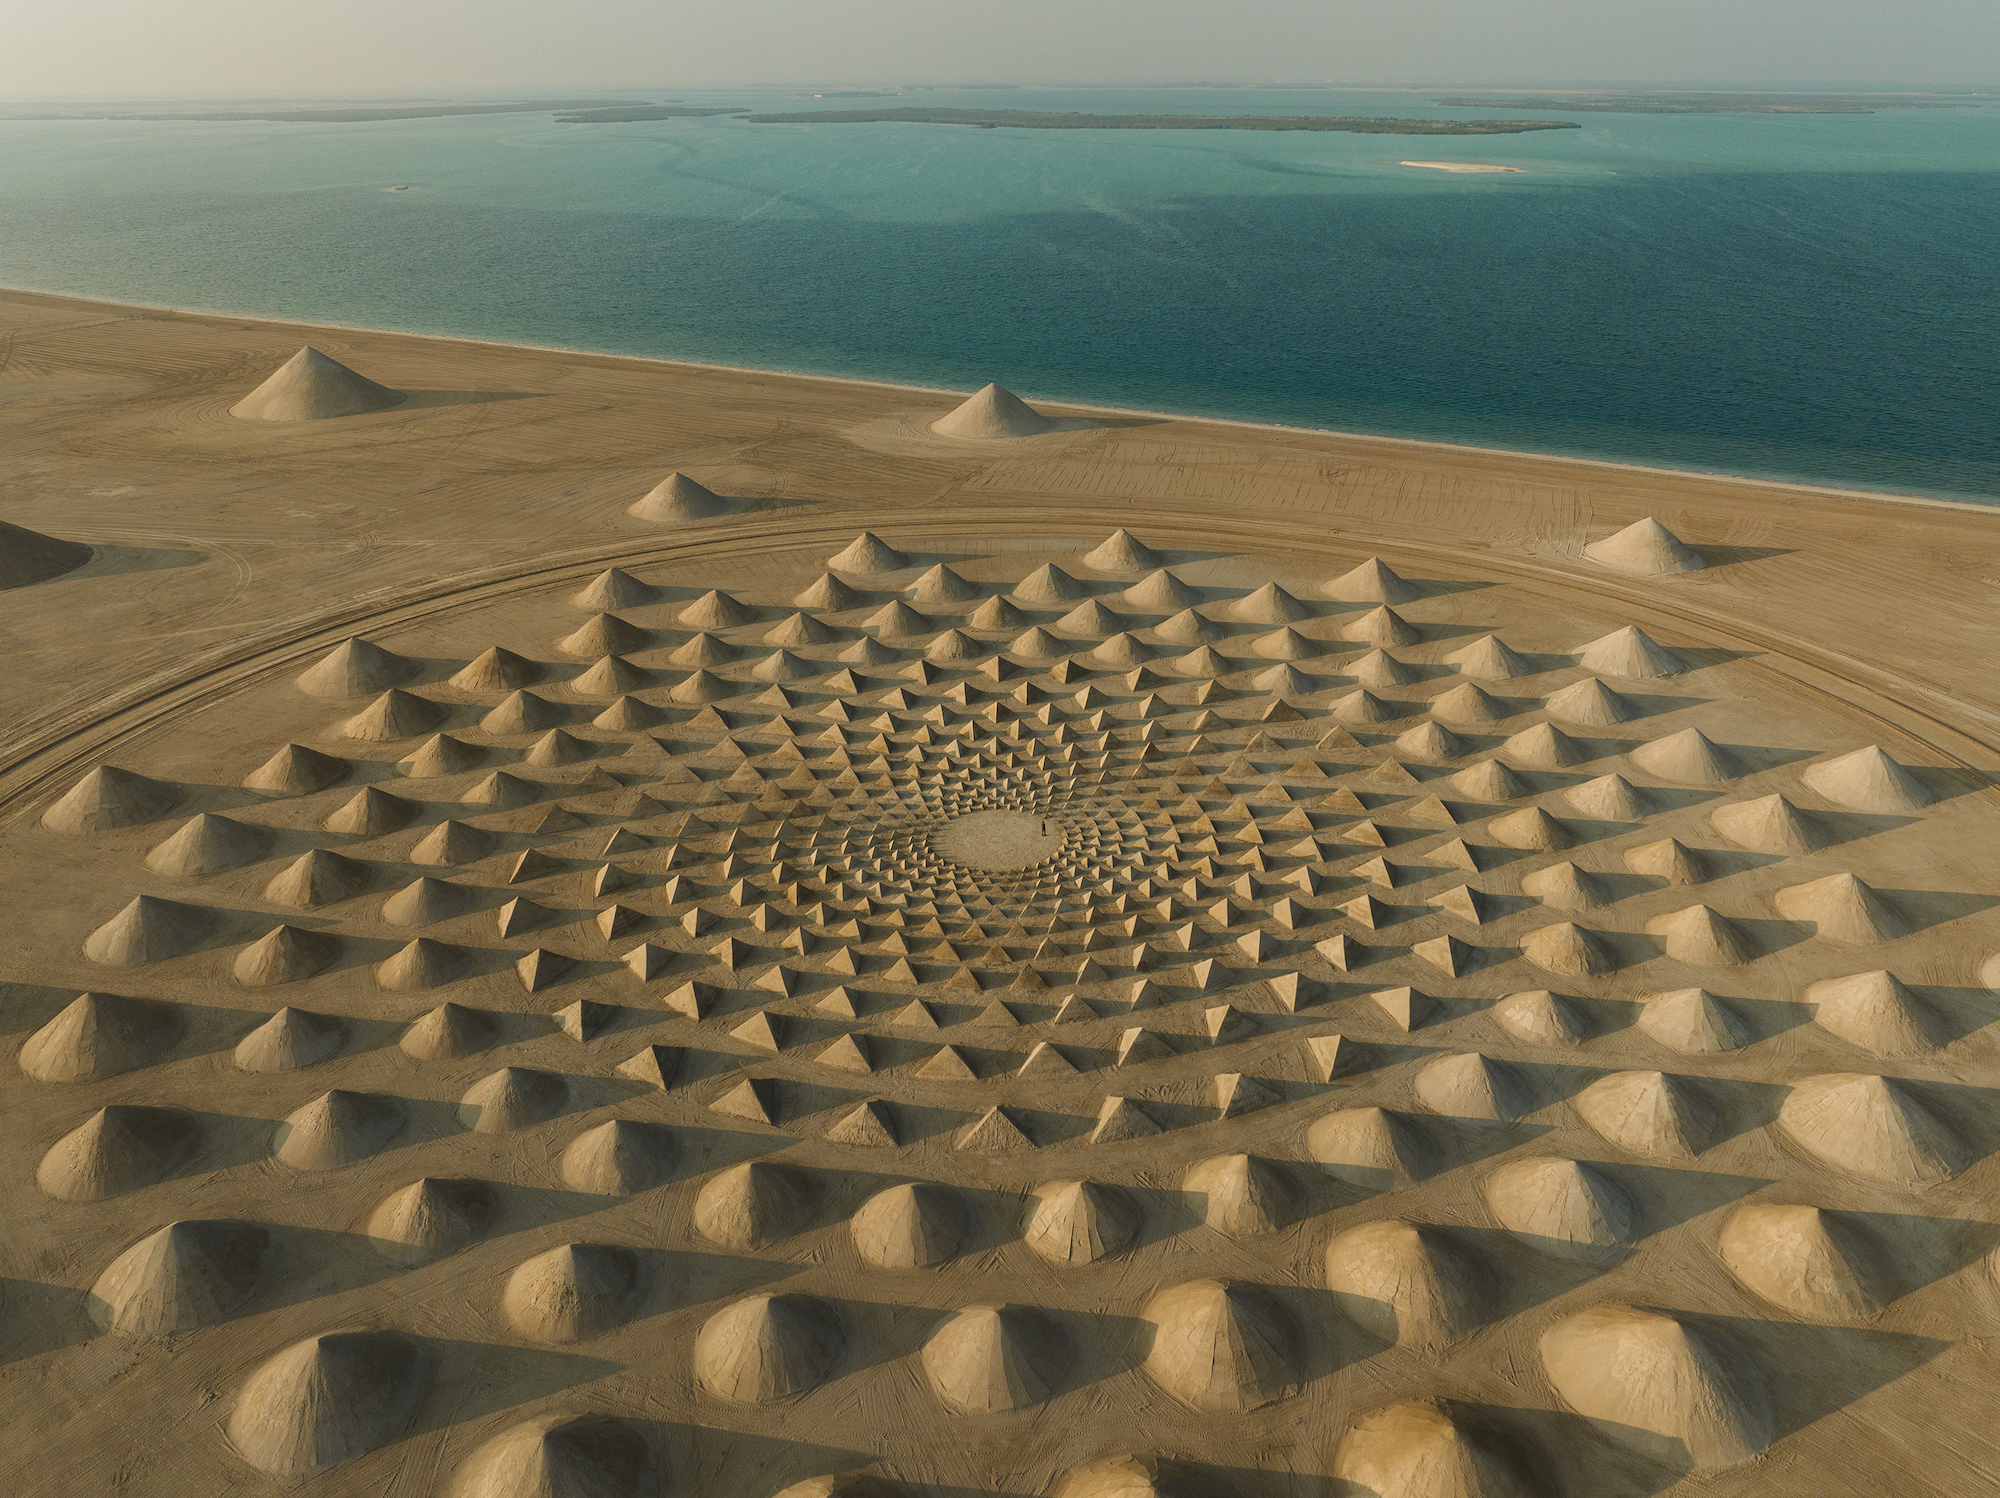 An aerial view of a giant land art installation featuring 19 concentric circles of 448 pyramids formed from sand. The installation is on the shore of the Arabian Sea, and a figure stands in the center. 